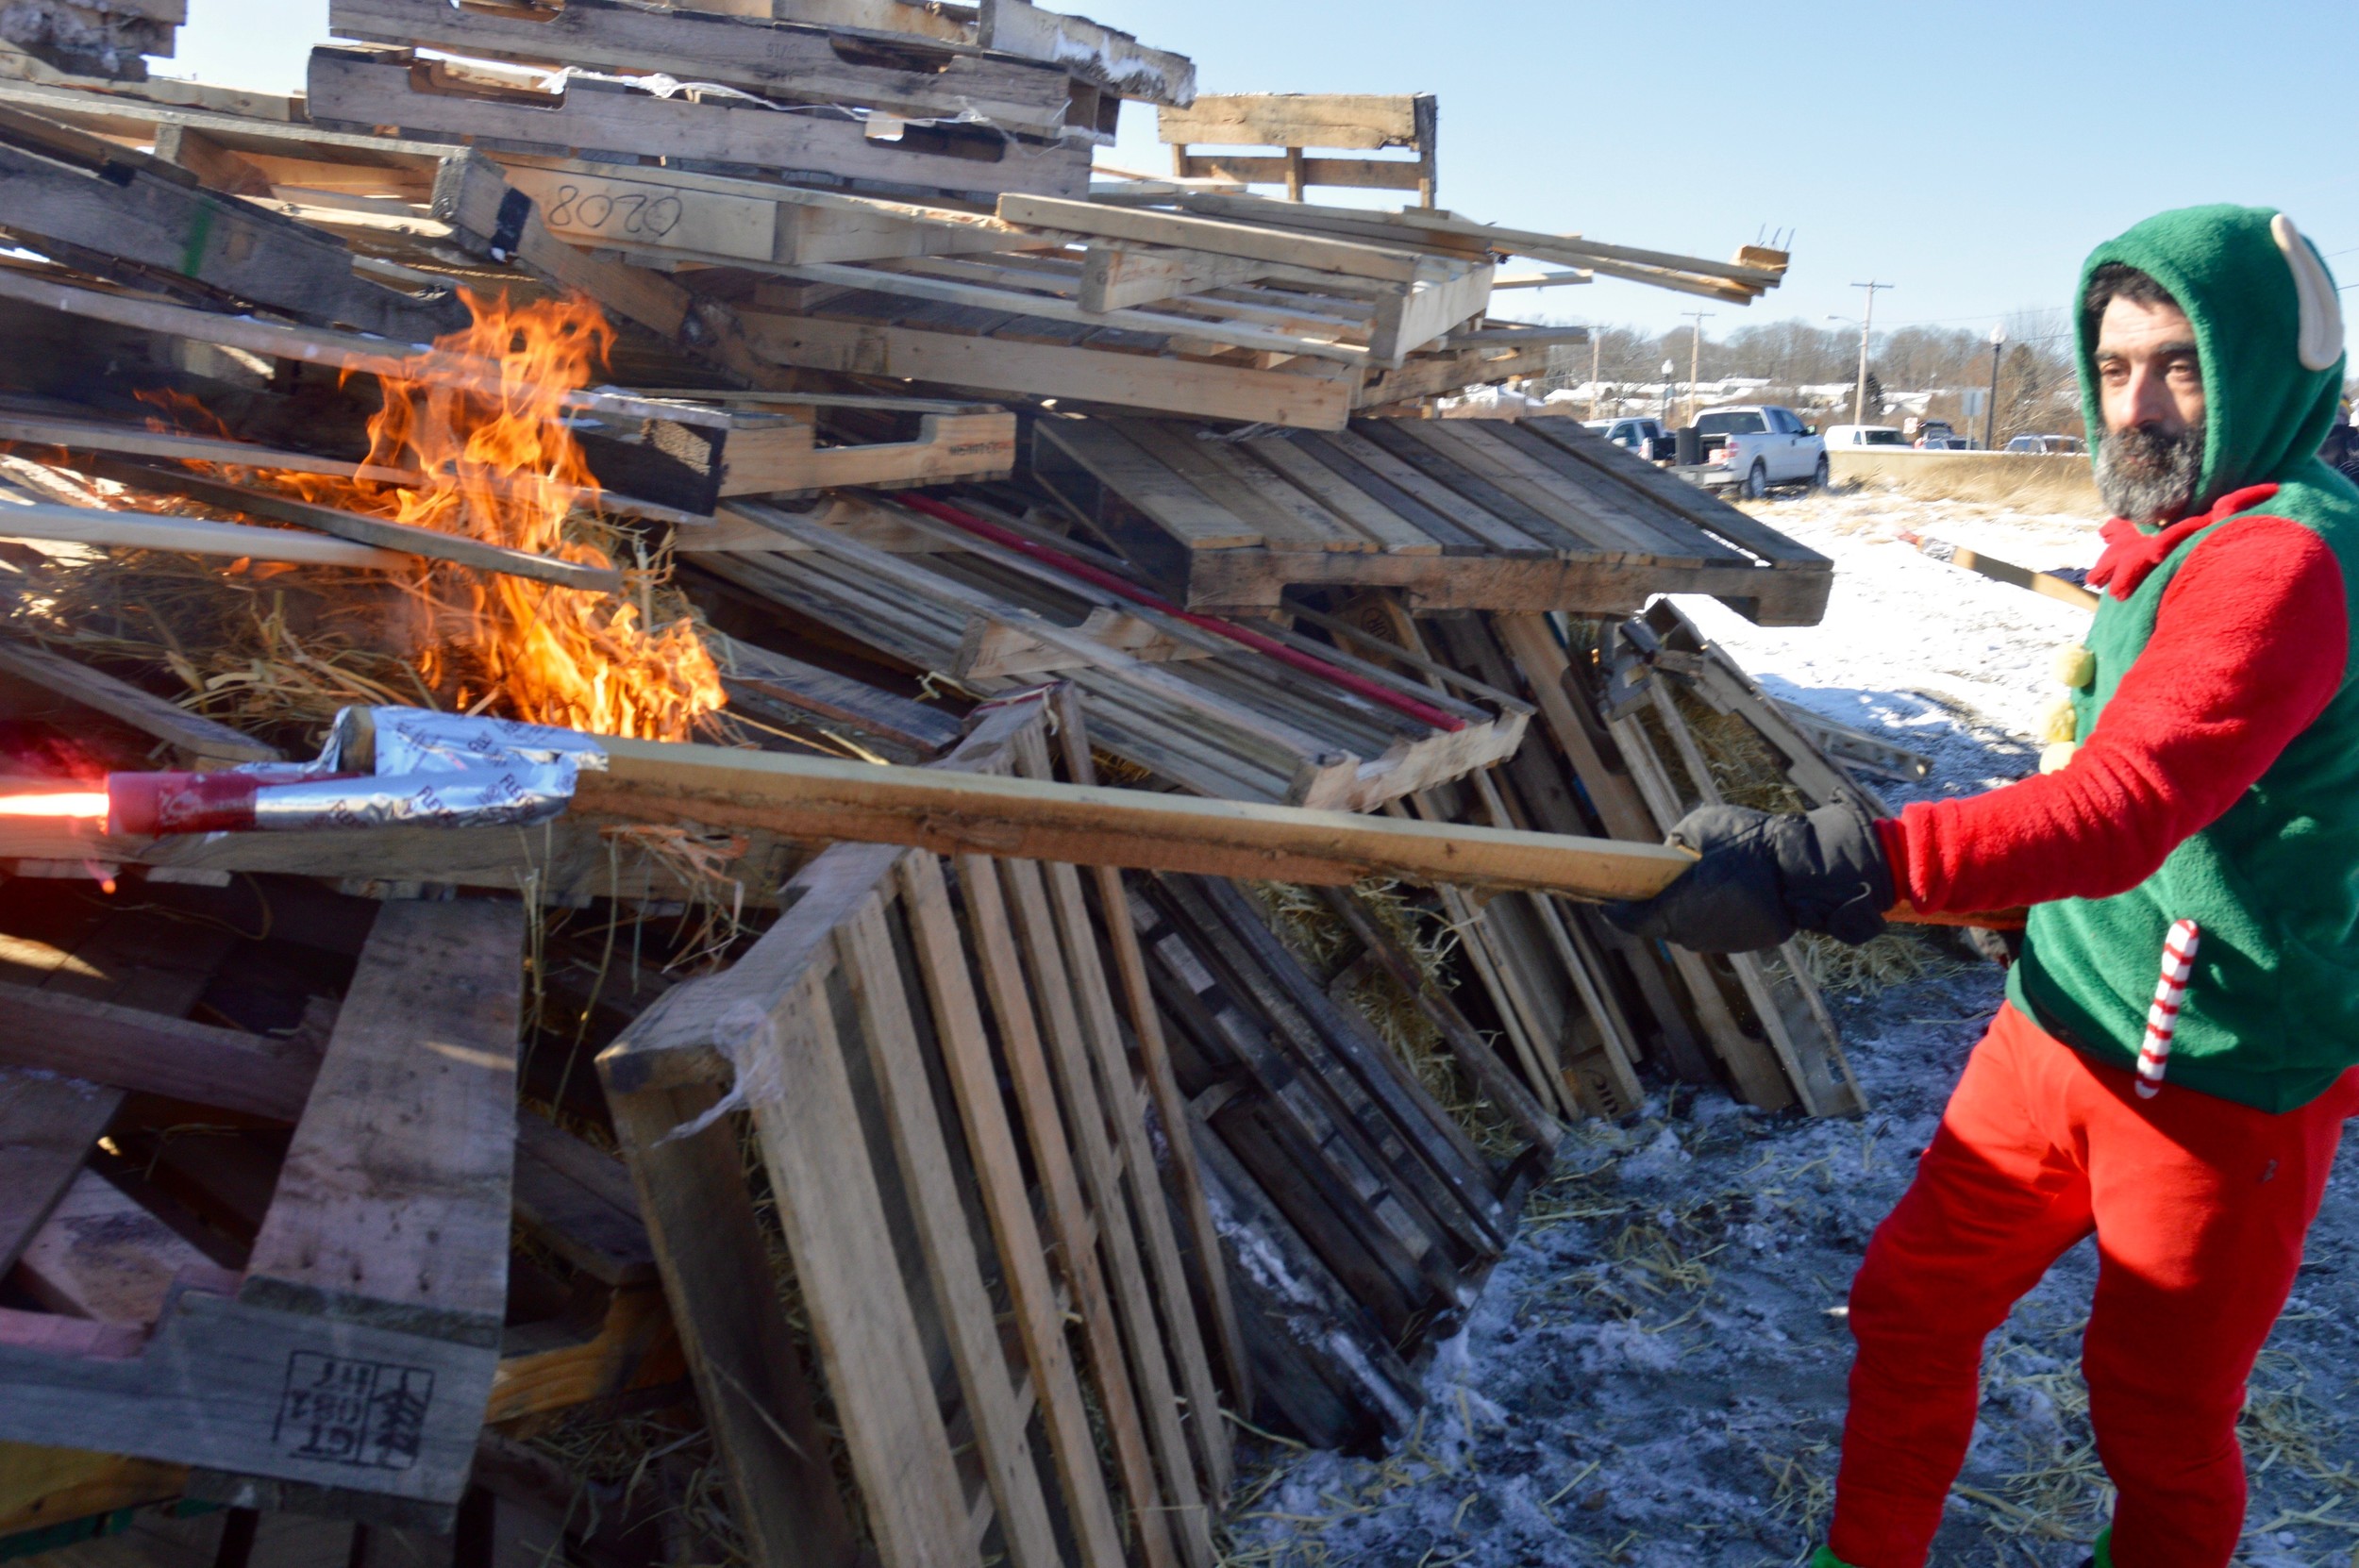 Before he jumped in himself, Chris Freitas helped light the bonfire, which used 402 pallets.